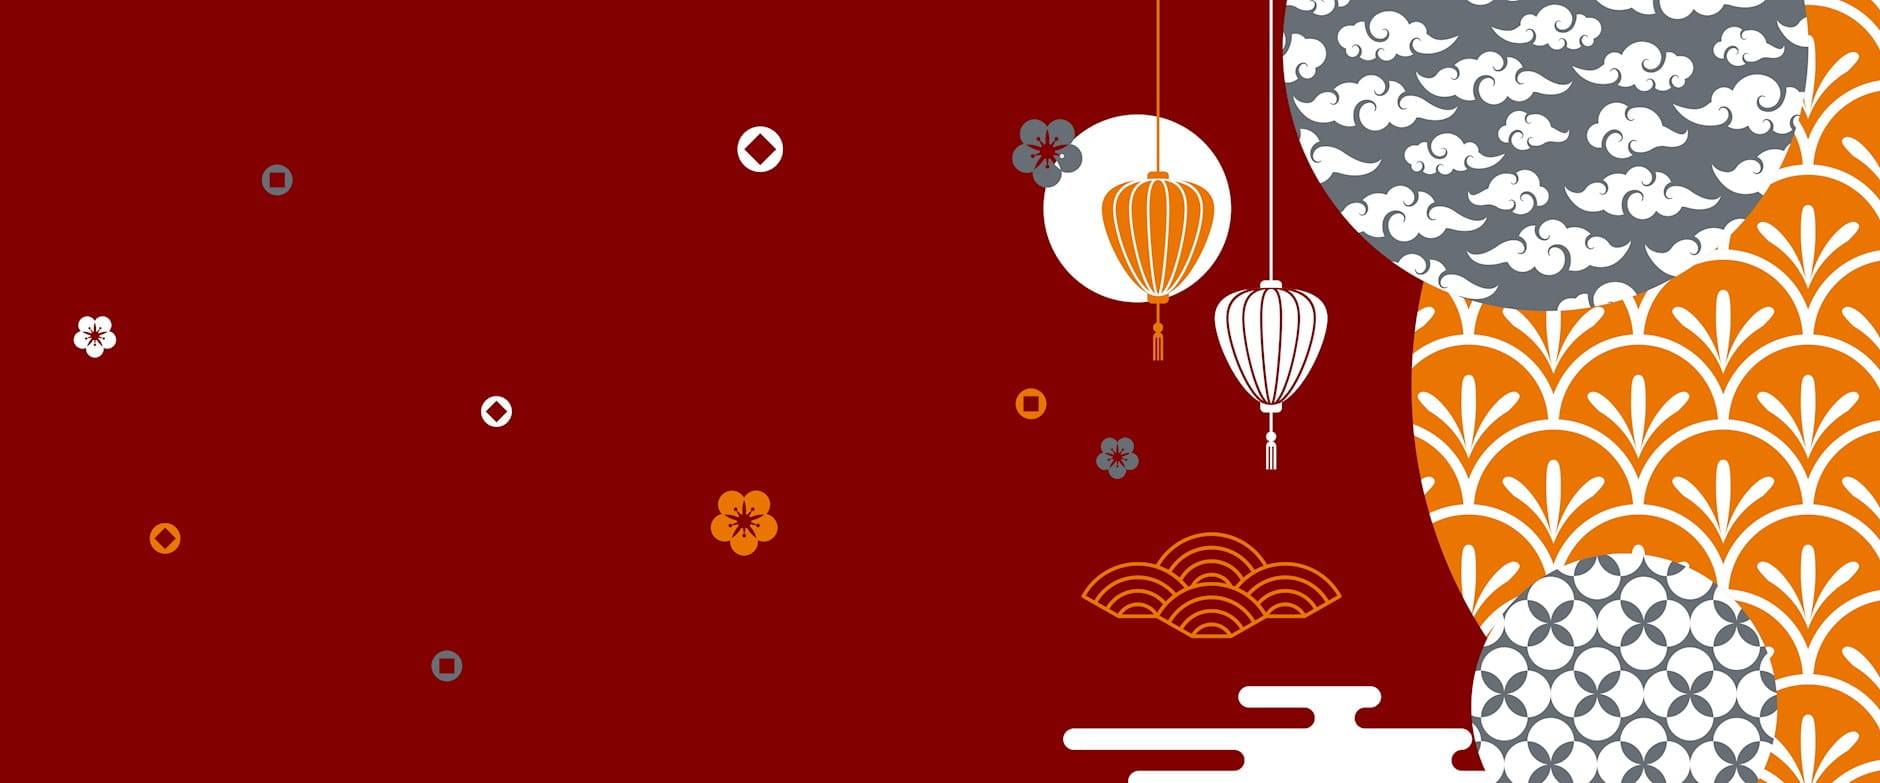 Illustrated clouds, circles, and lanterns